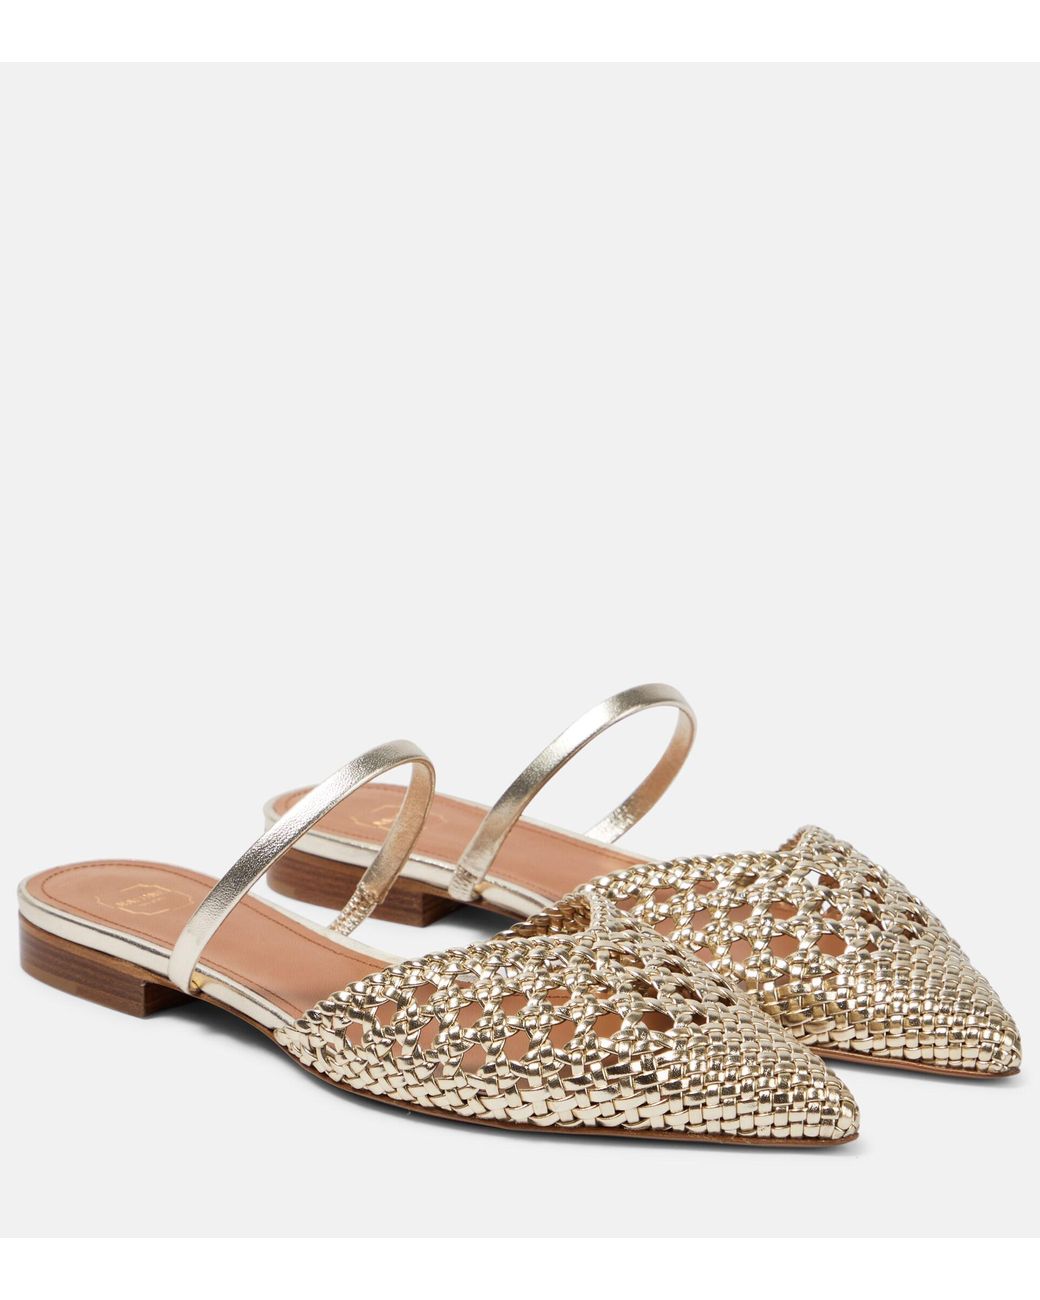 Malone Souliers Marla Leather Flats in Natural | Lyst